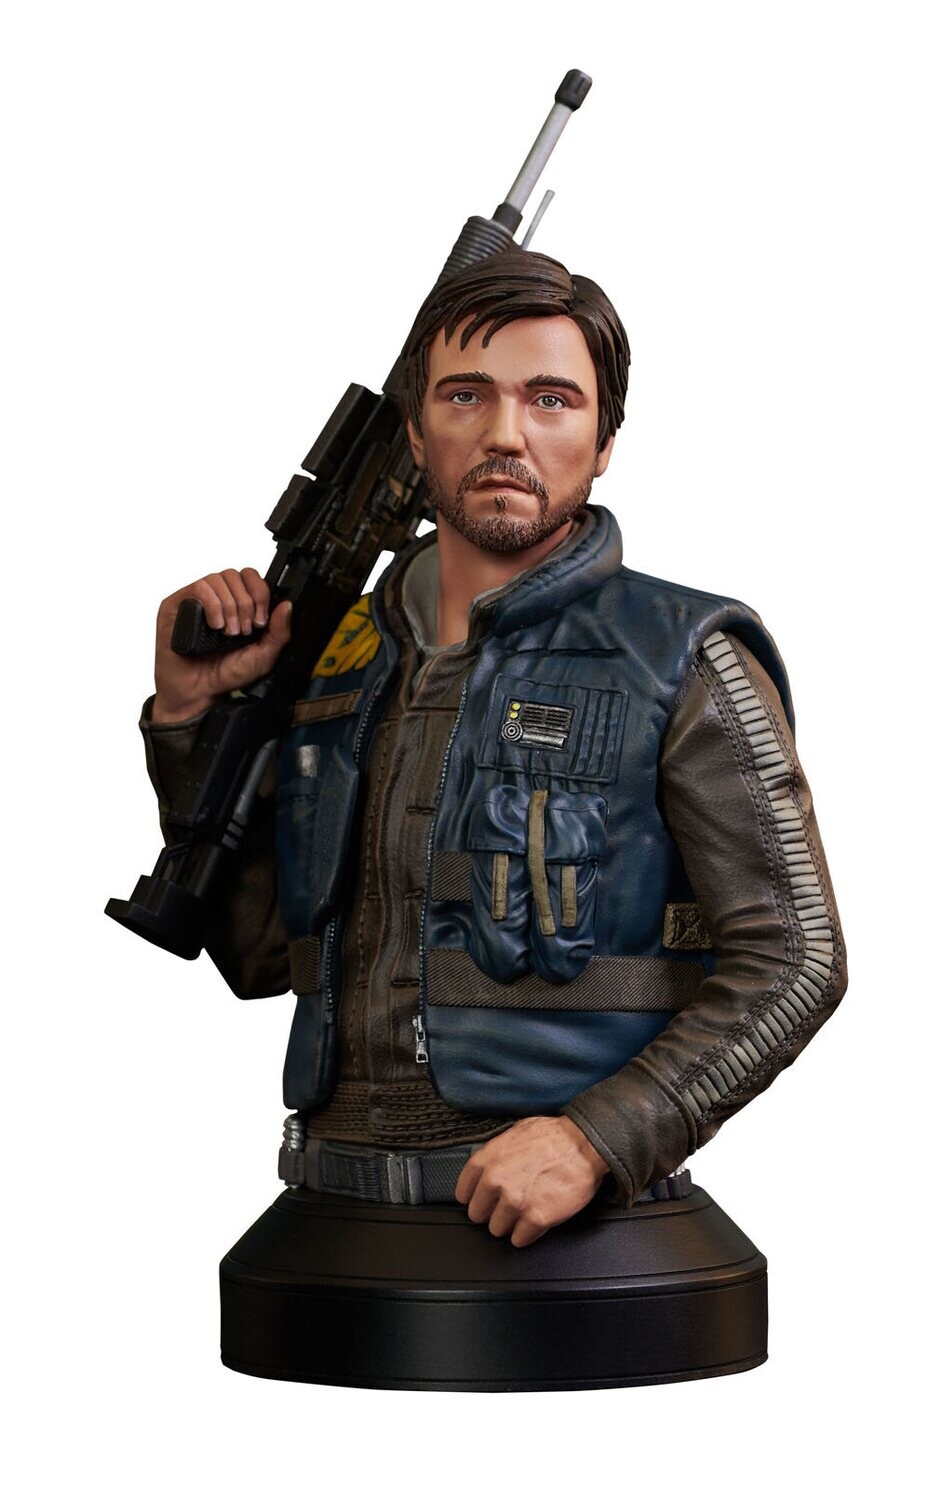 PRE-ORDER Diamond Select Star Wars Rogue One Cassian Andor 1/6th Scale